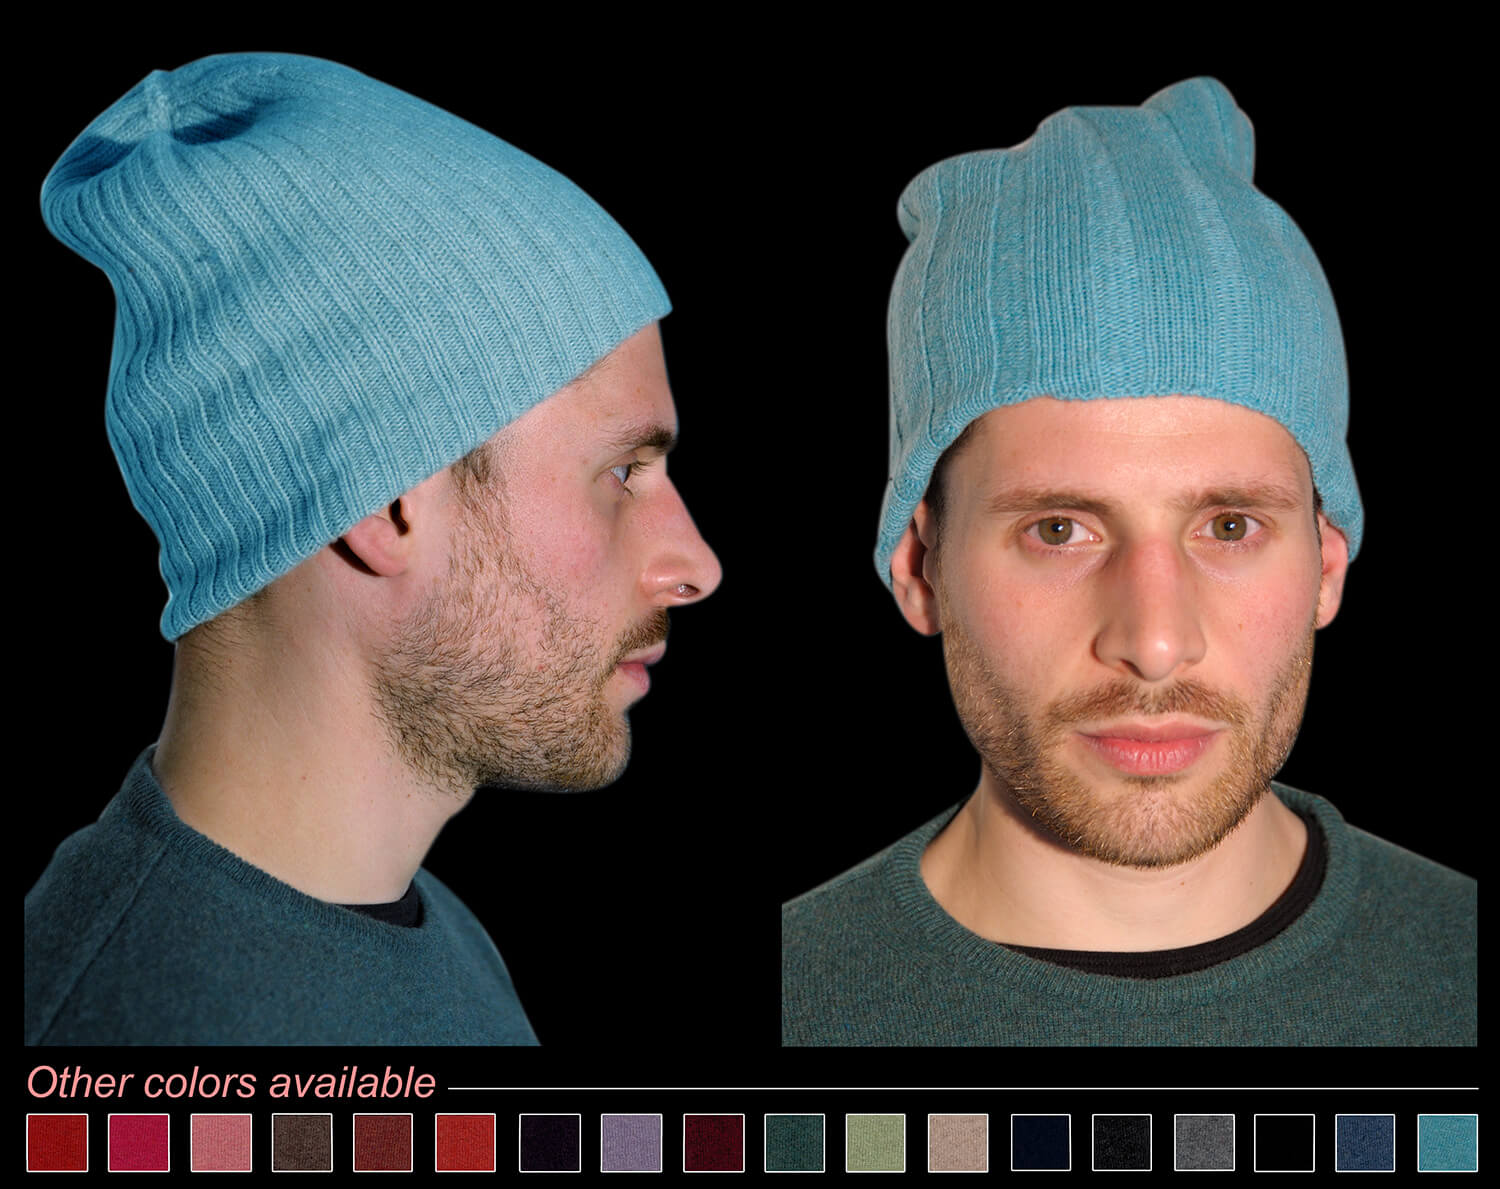 Man hat color turquoise code 119 and 298